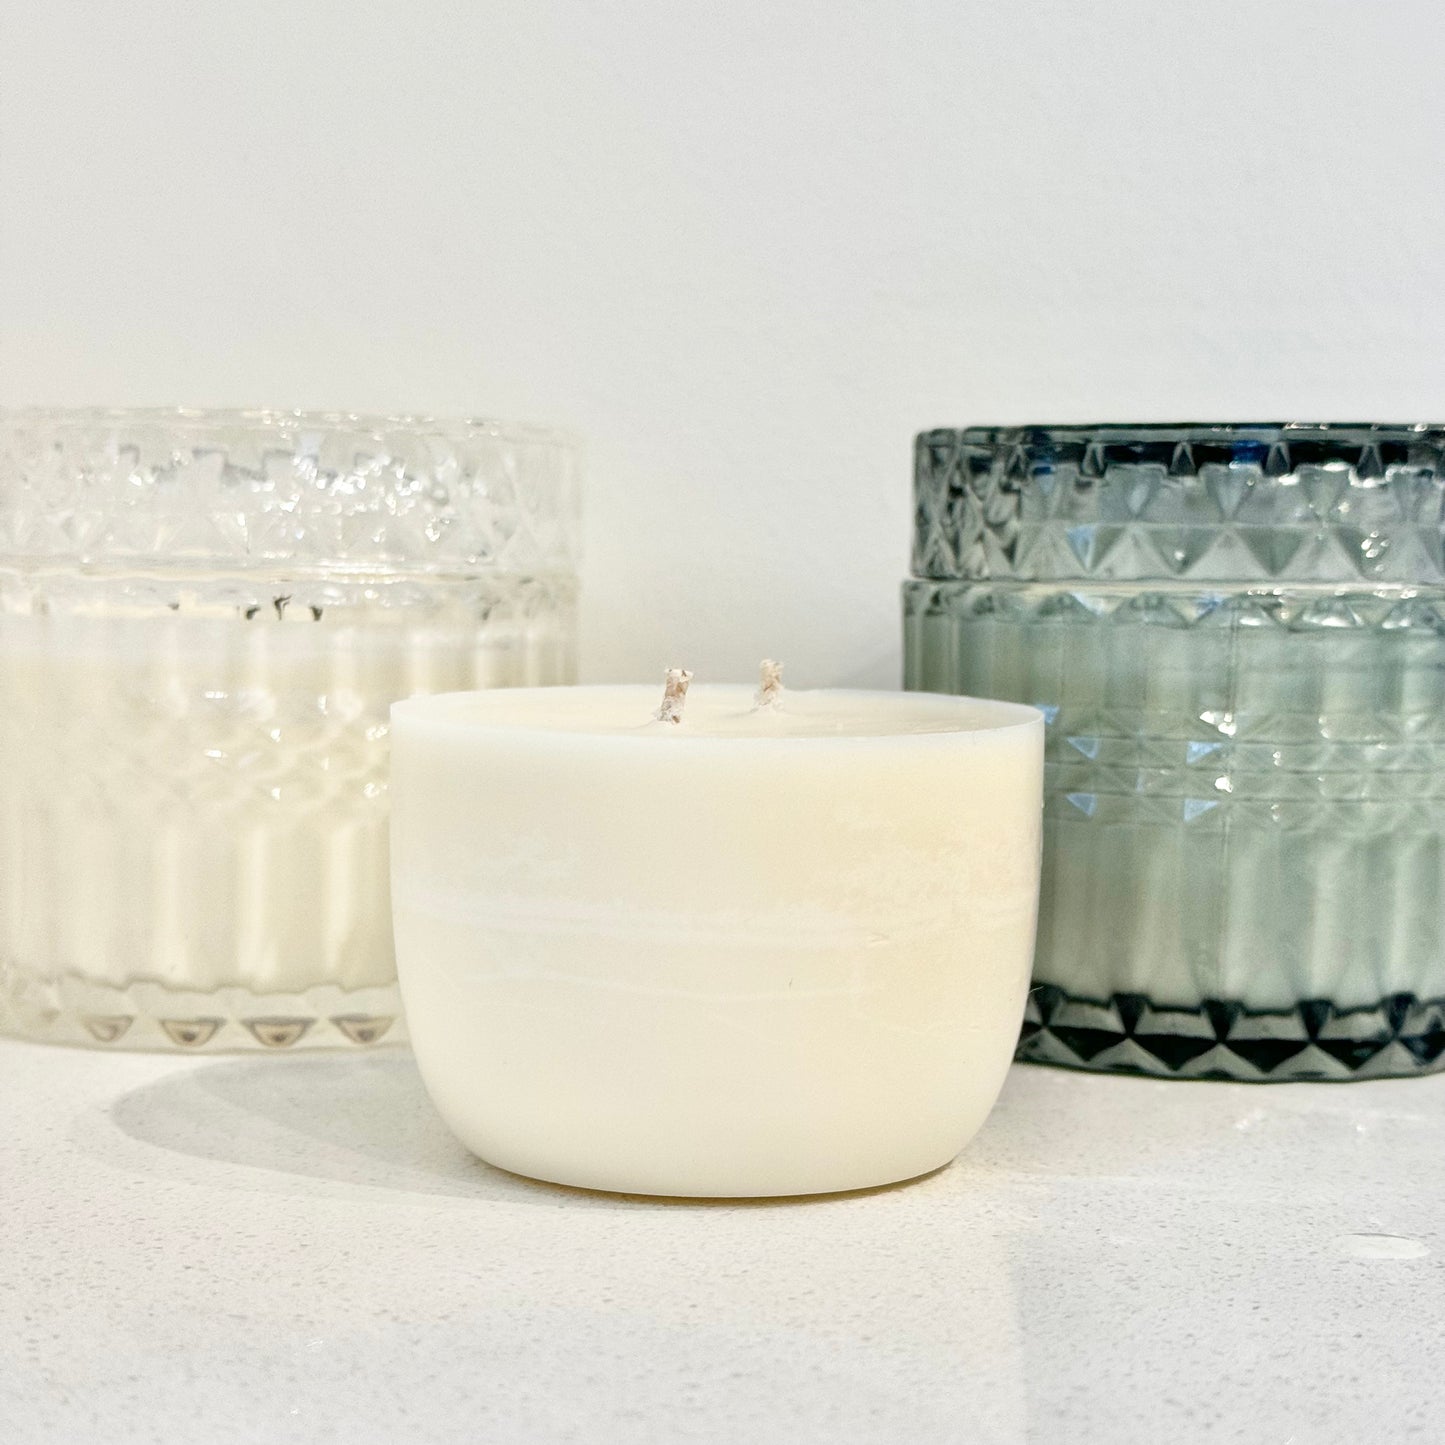 Refill - Vintage inspired vessels only